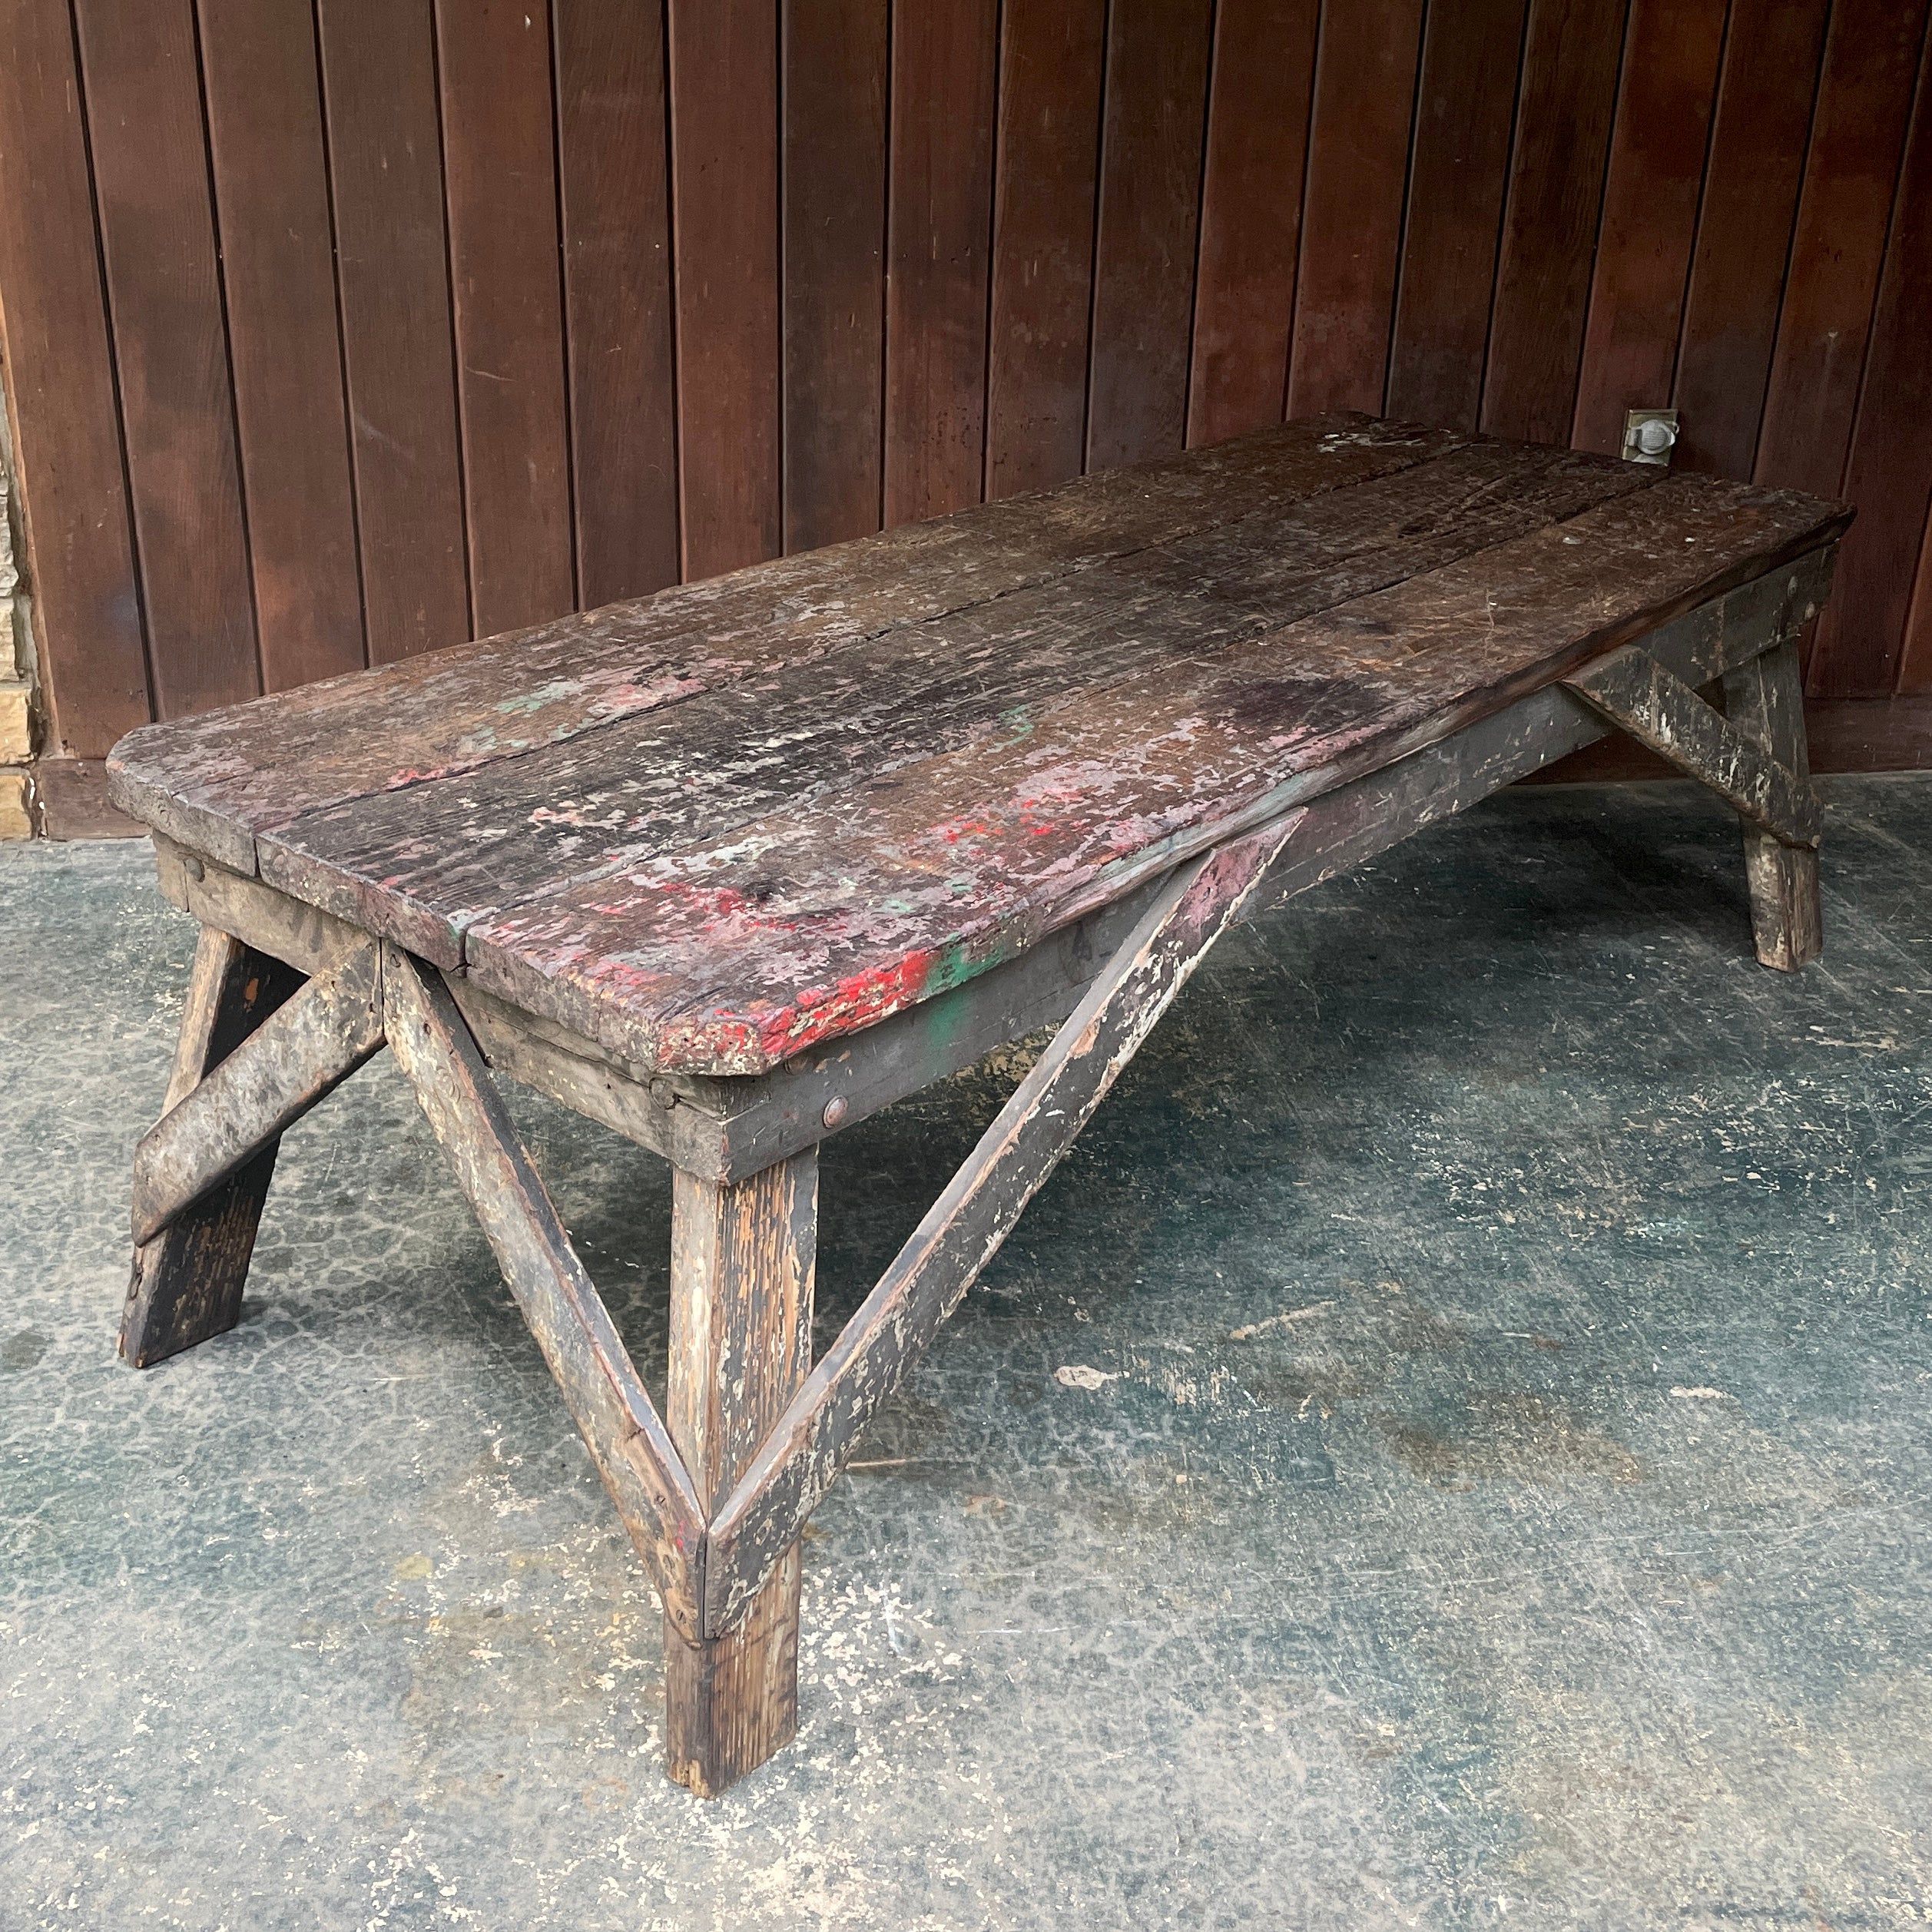 Extremely old patina.  Very heavy, most likely in-house factory made specific low worktable, for some type of assembly plant.  Low at 22.25 inches high.  Sturdy very usable, tight.

L 71 x D 28 7/8 x H 22 1/4 in.
